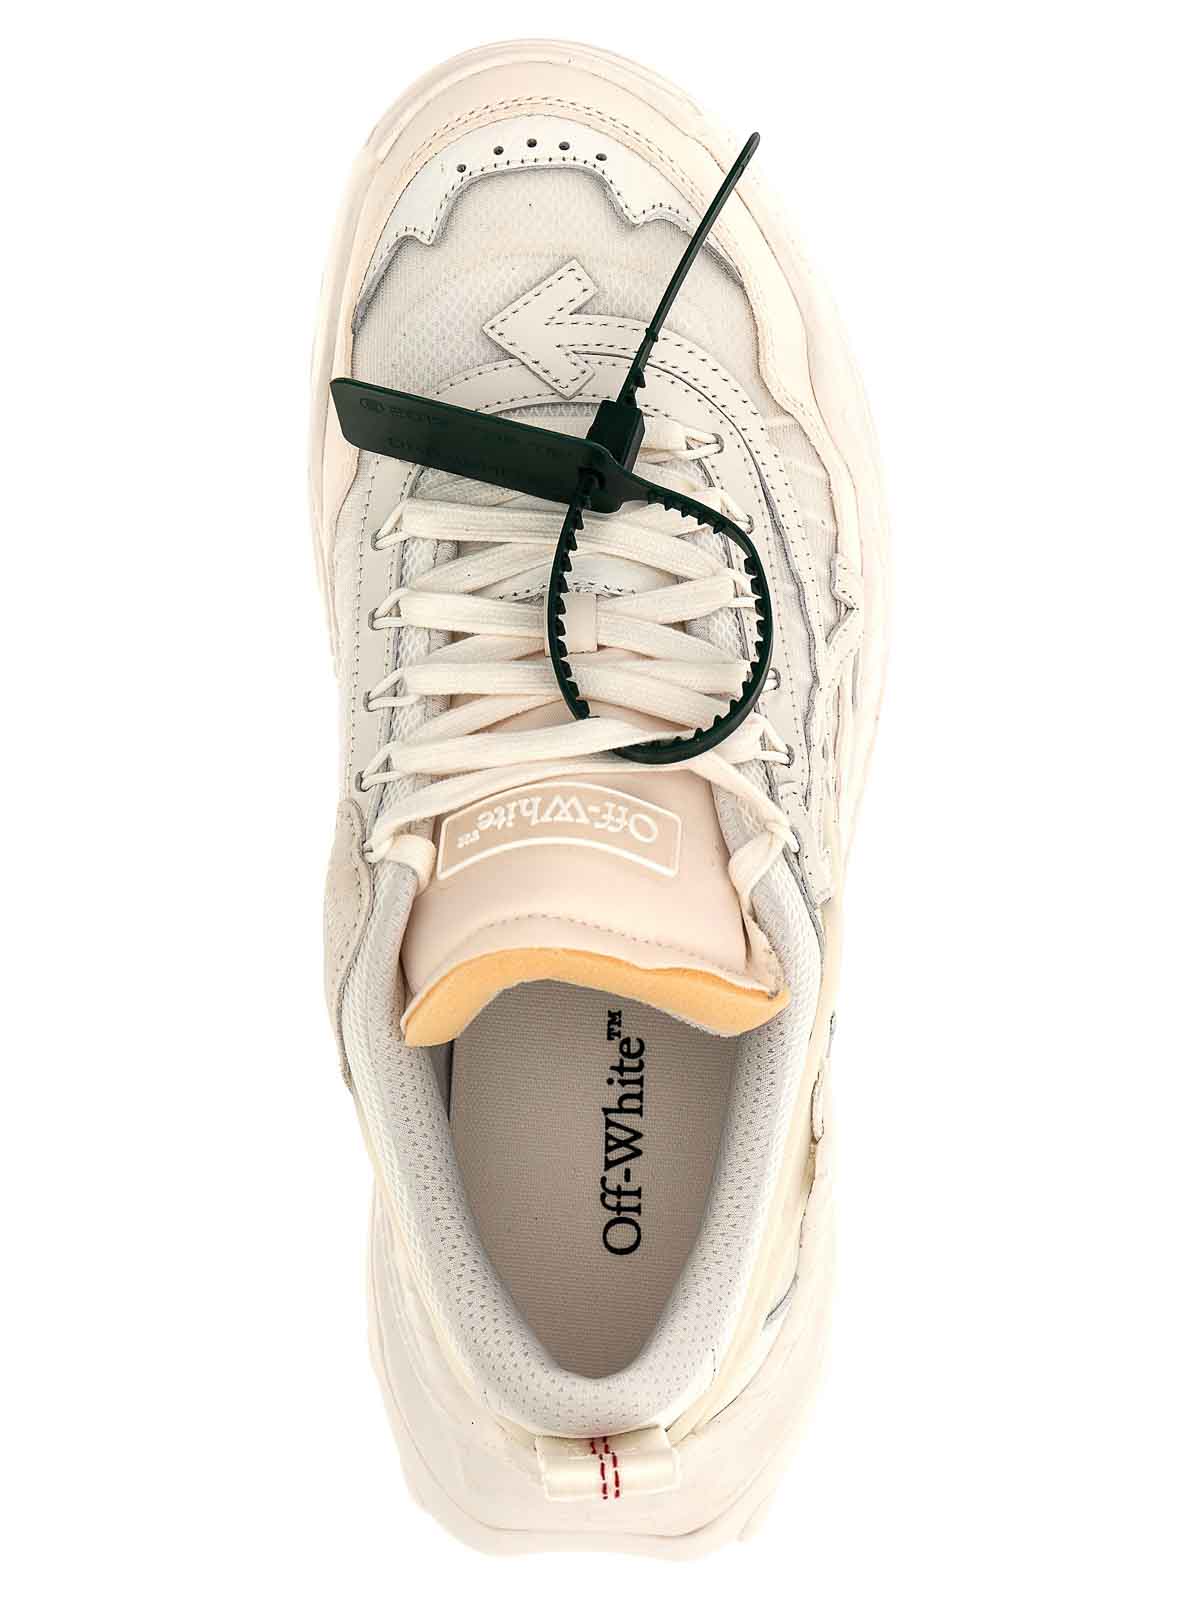 Off-White Odsy-1000 Grey / Grey Low Top Sneakers - Sneak in Peace